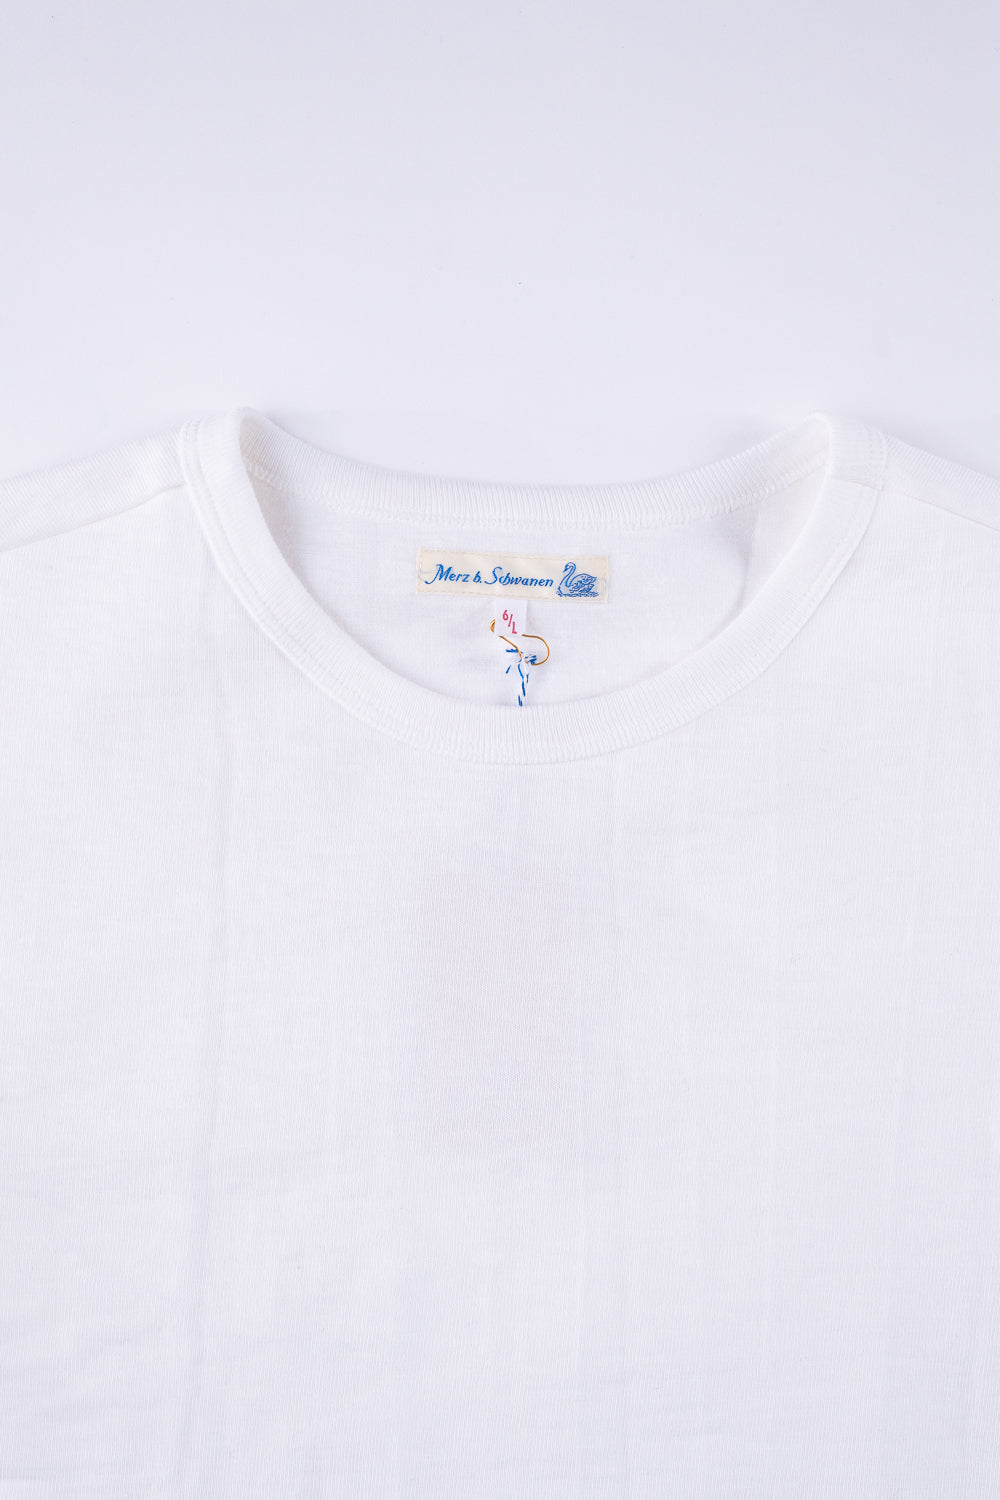 2S14.01 - 13.4oz Loopwheeled Heavy T-Shirt Relaxed Fit - White